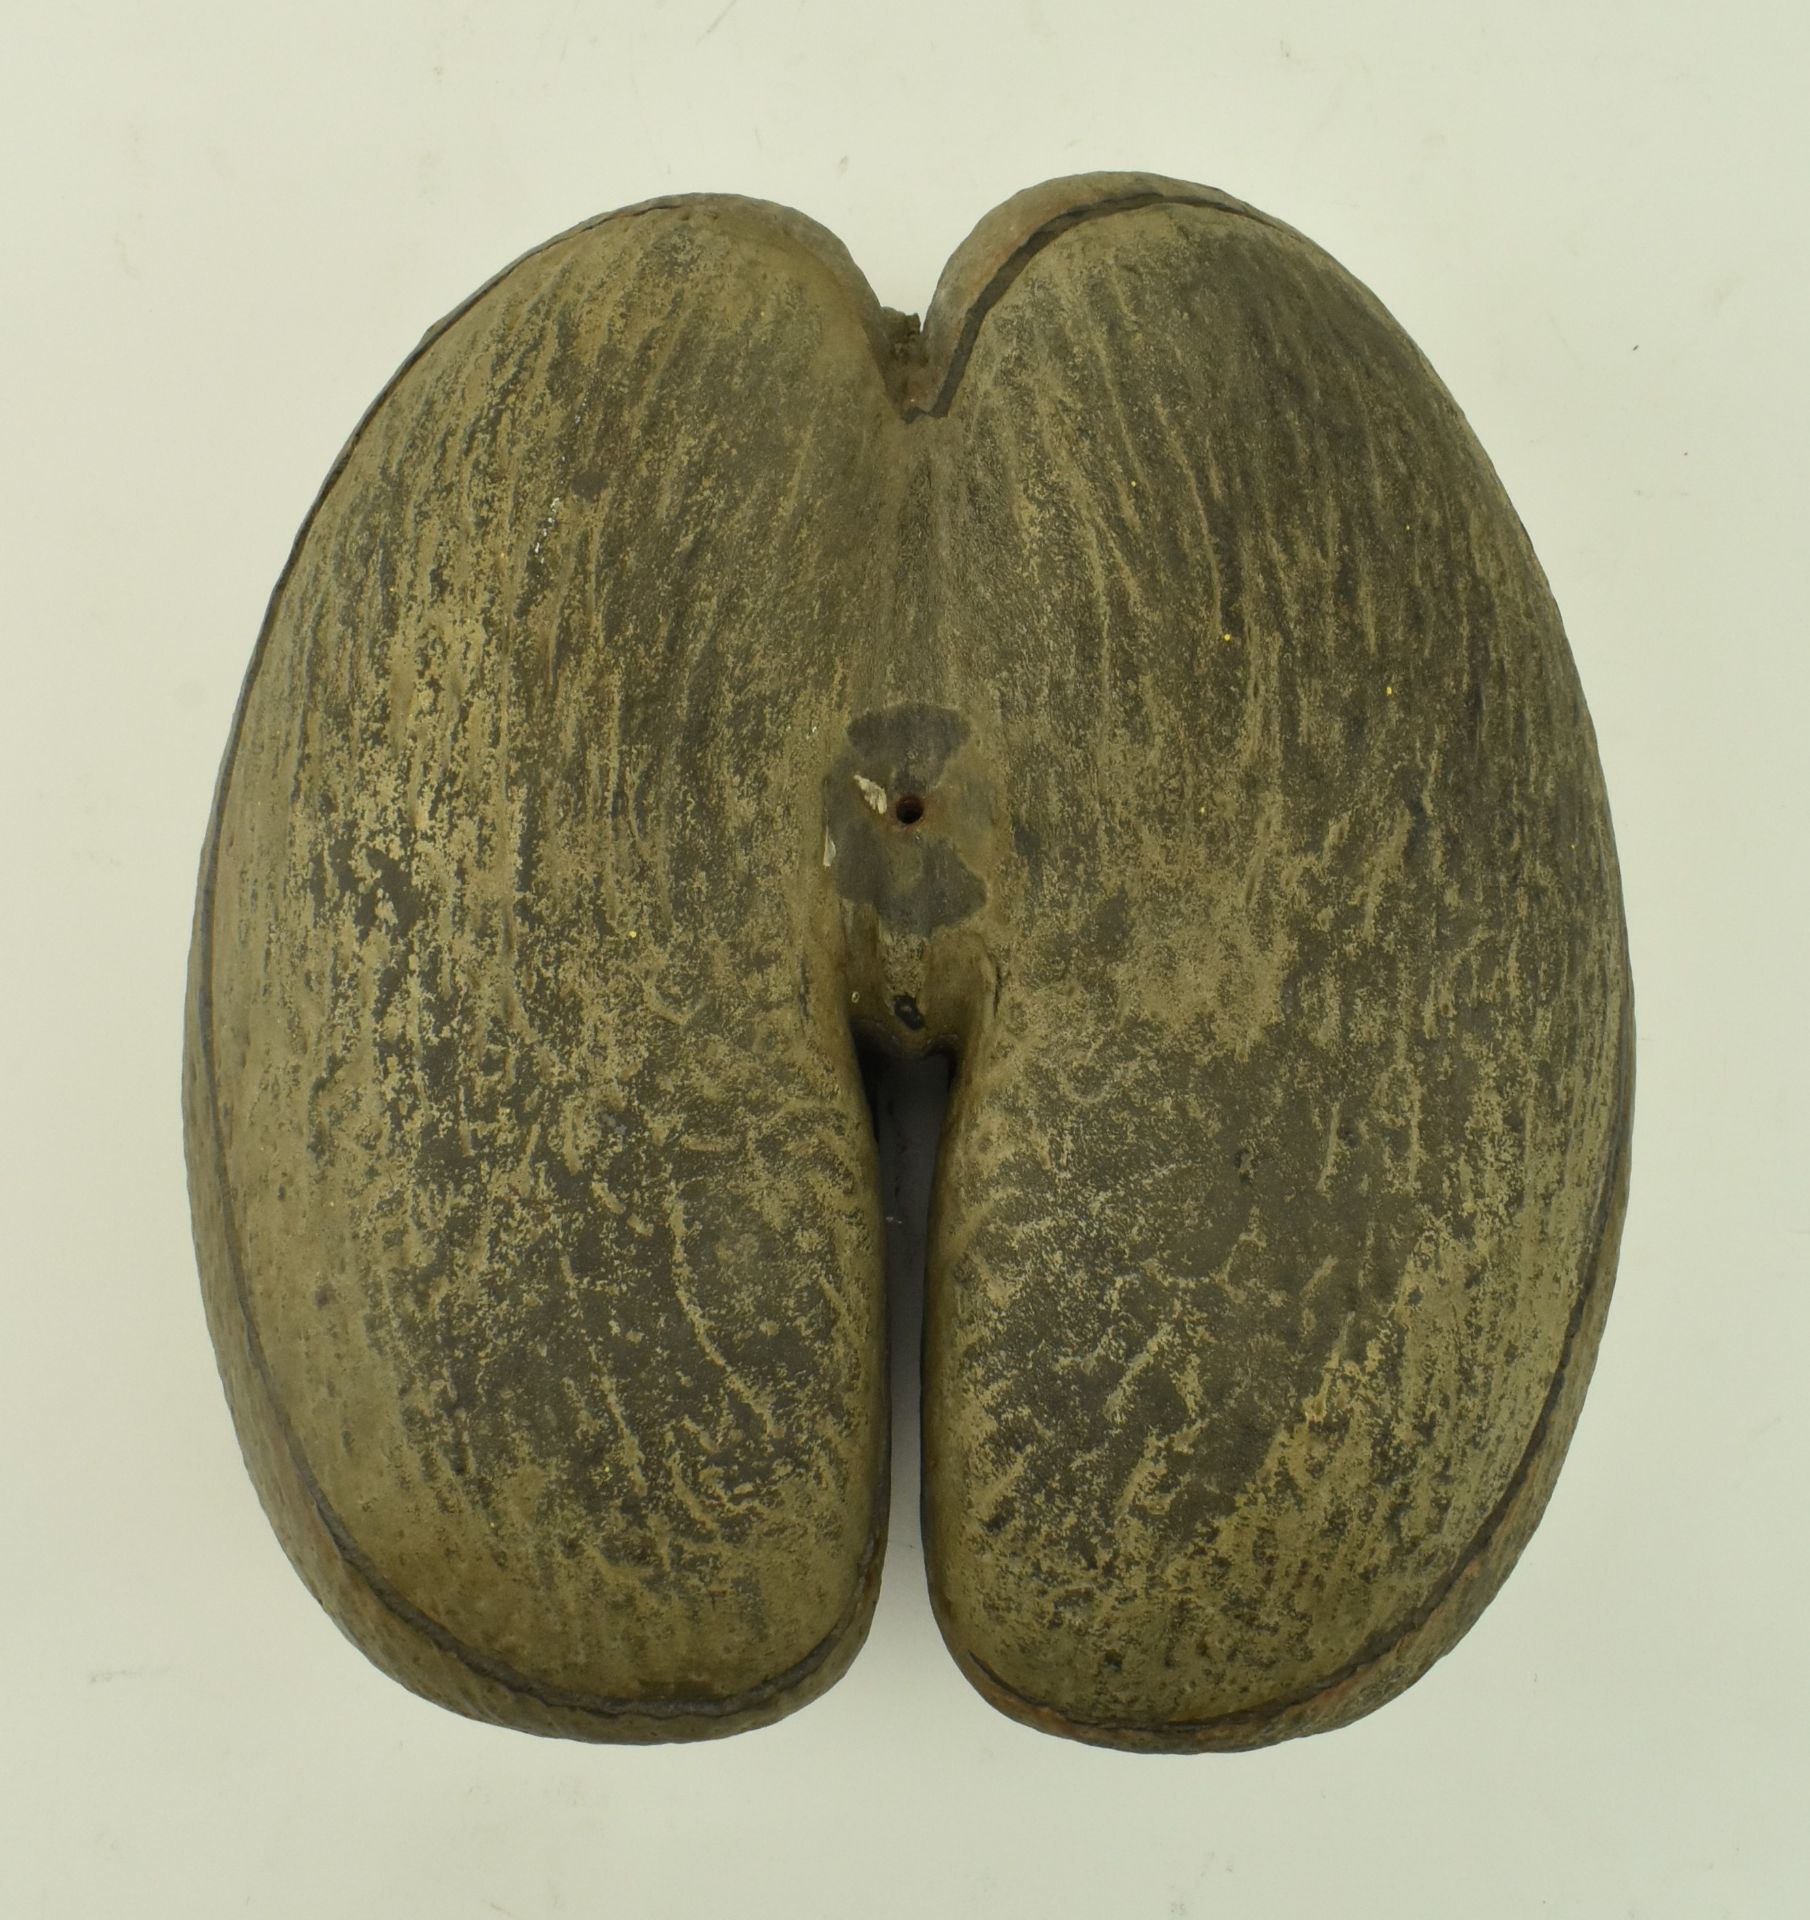 UNPOLISHED COCO DE MER NUT WITH CUT TOP - Image 2 of 5